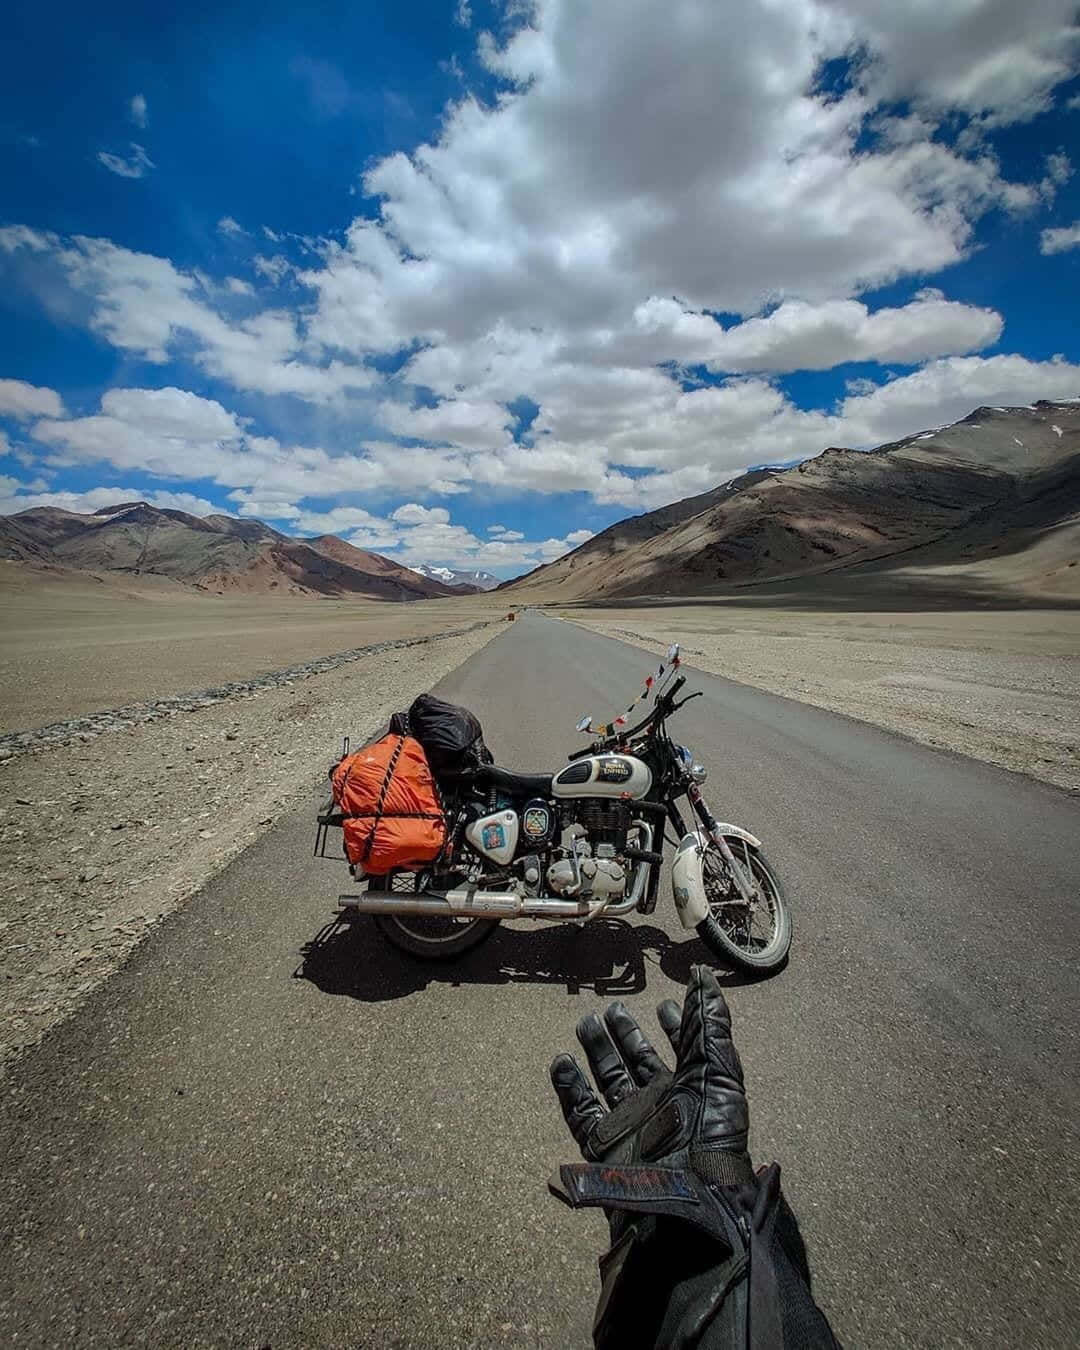 A Motorcycle Is Parked On A Deserted Road